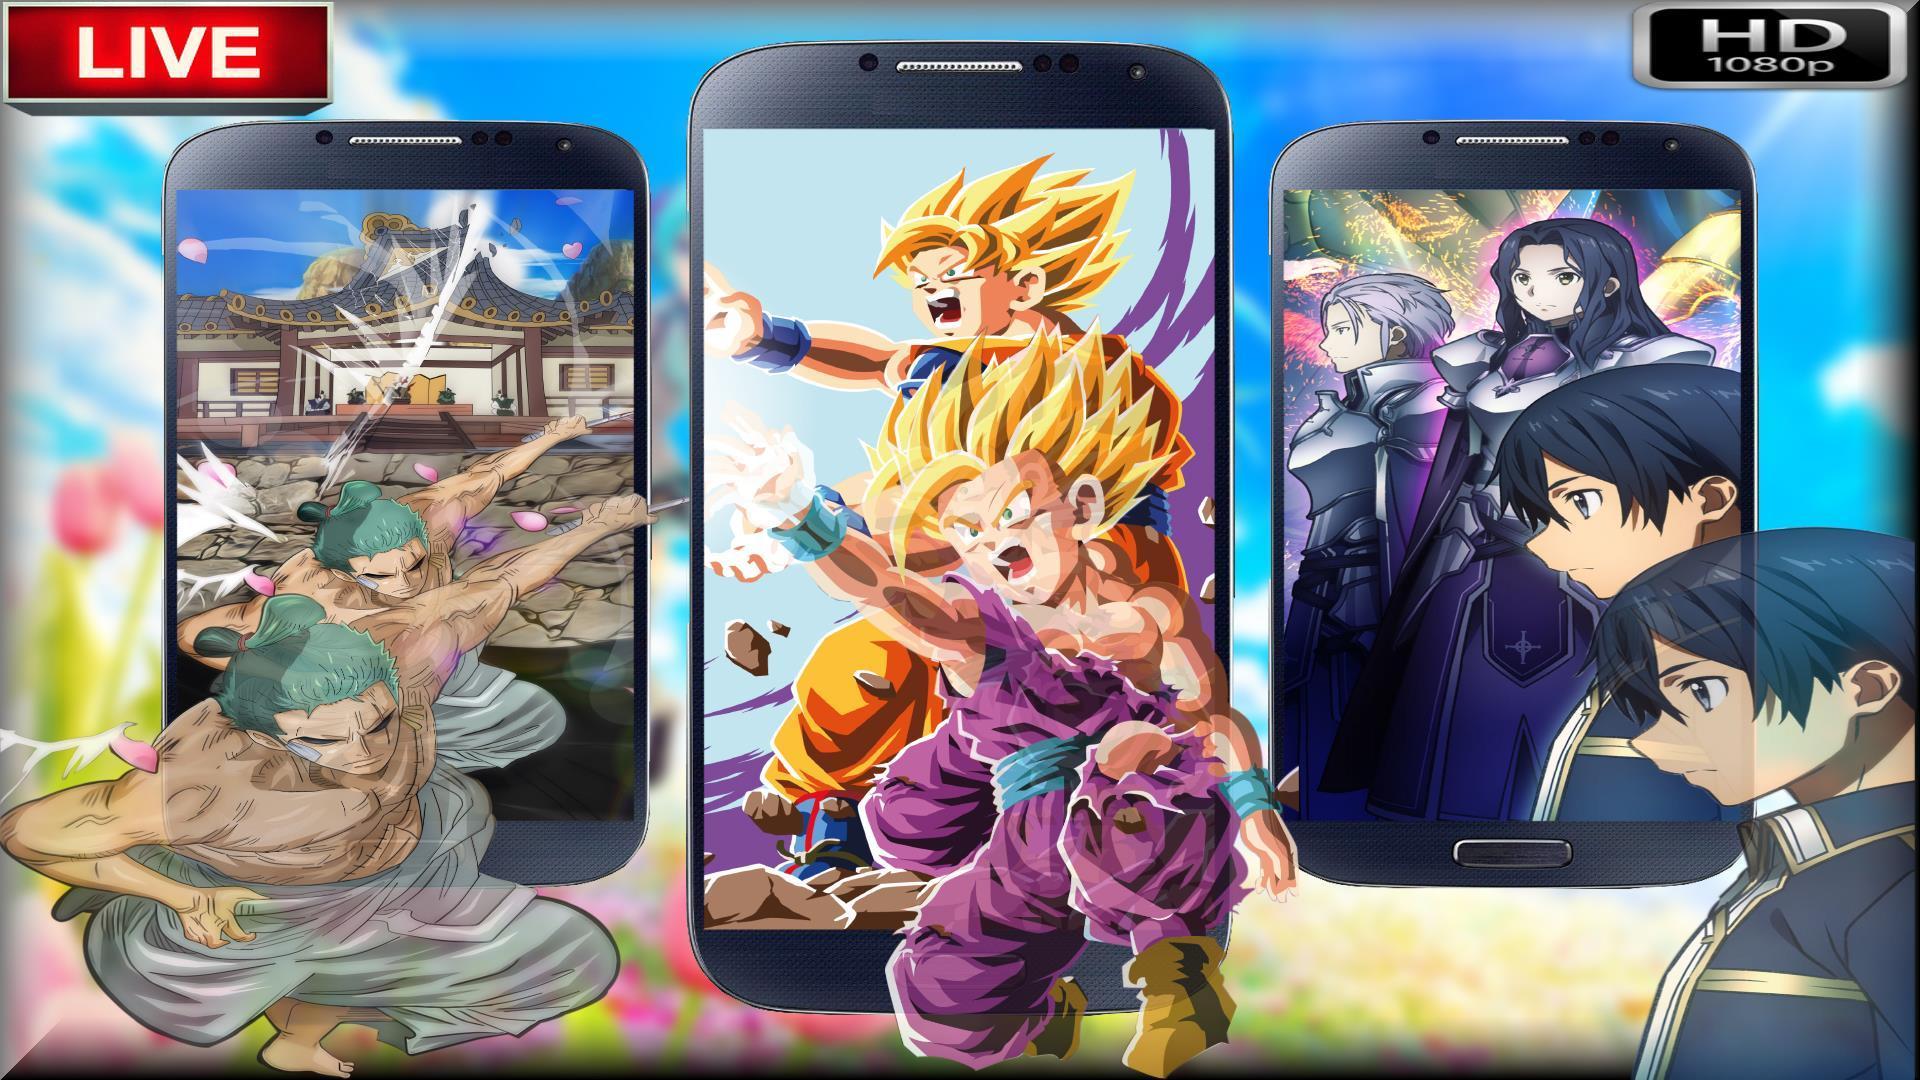 Anime Wallpaper Live Hd For Android Apk Download